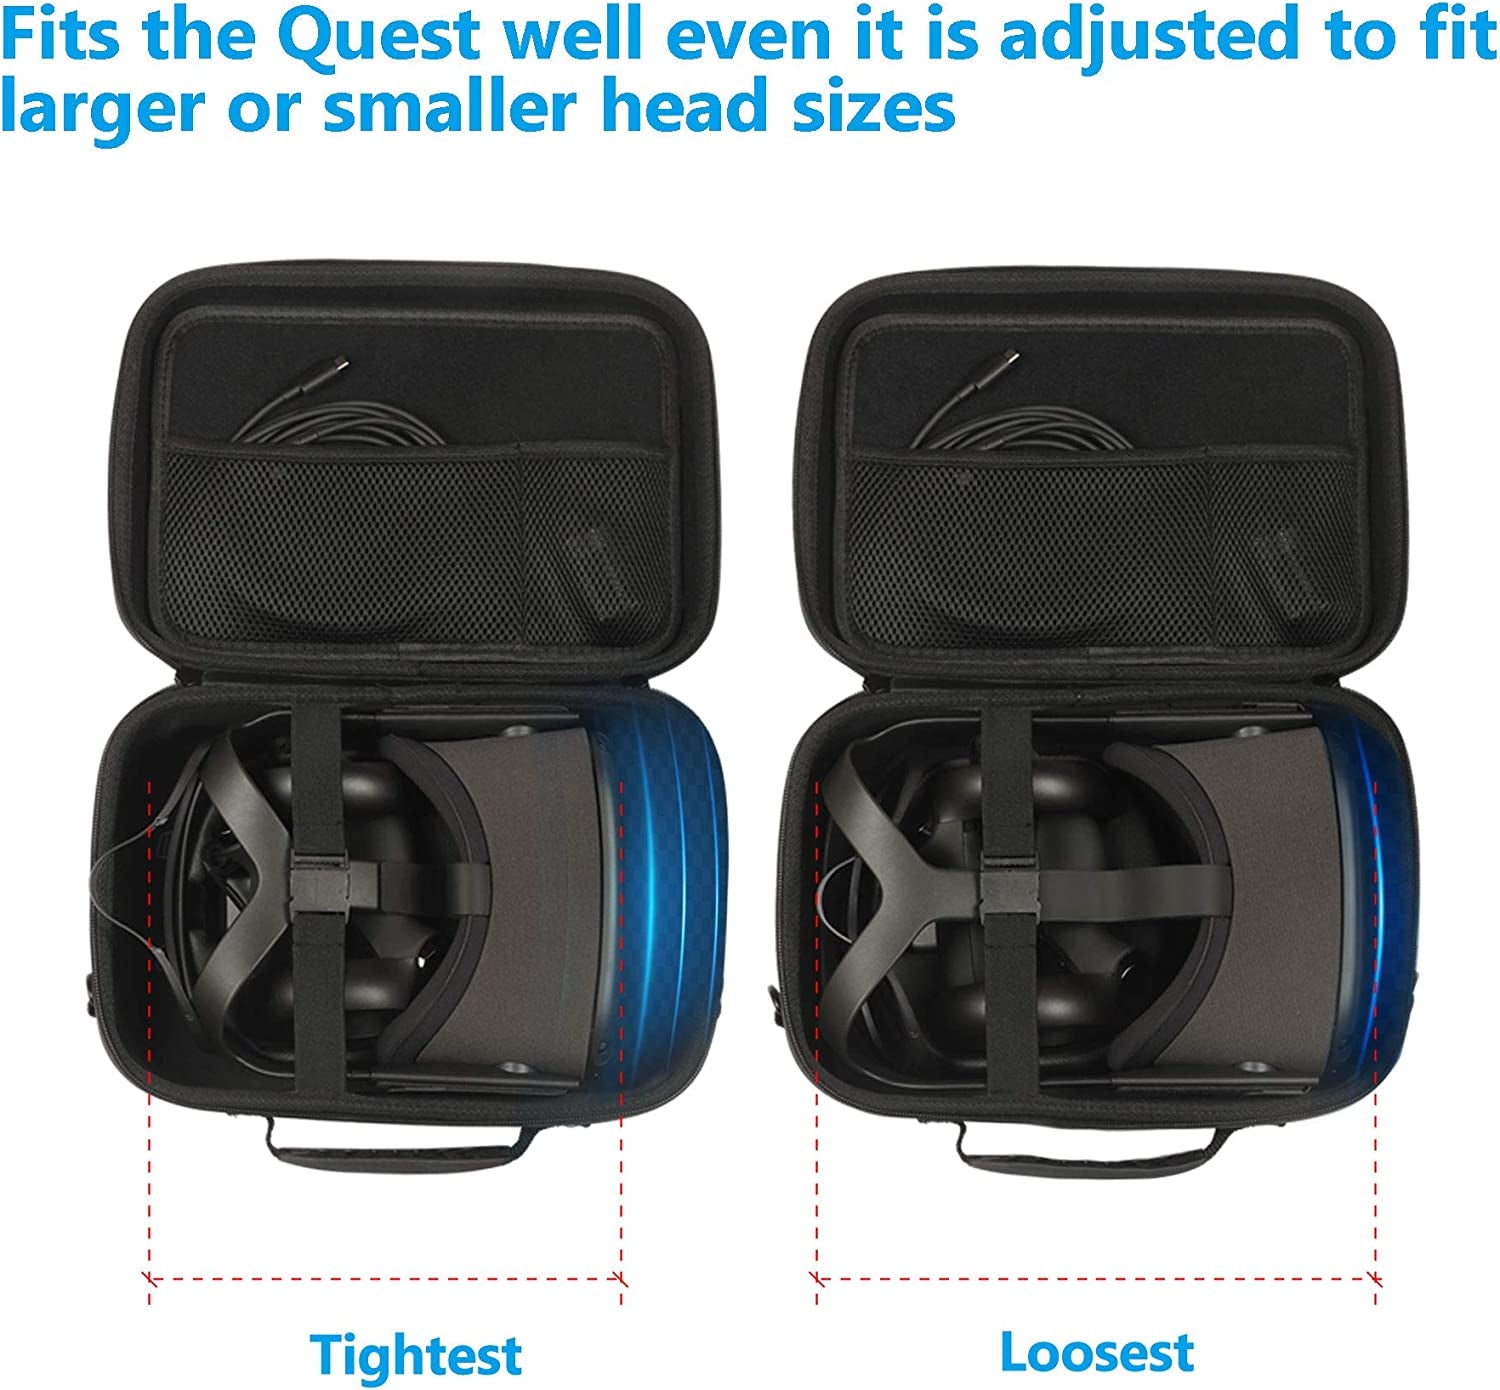 Case for Meta Quest JSVER Carrying Case for Meta/ Oculus Quest VR Gaming Headset and Controllers Accessories, Portable Hard Shell Protective Travel Storage Case for Meta Quest with Shoulder Strap